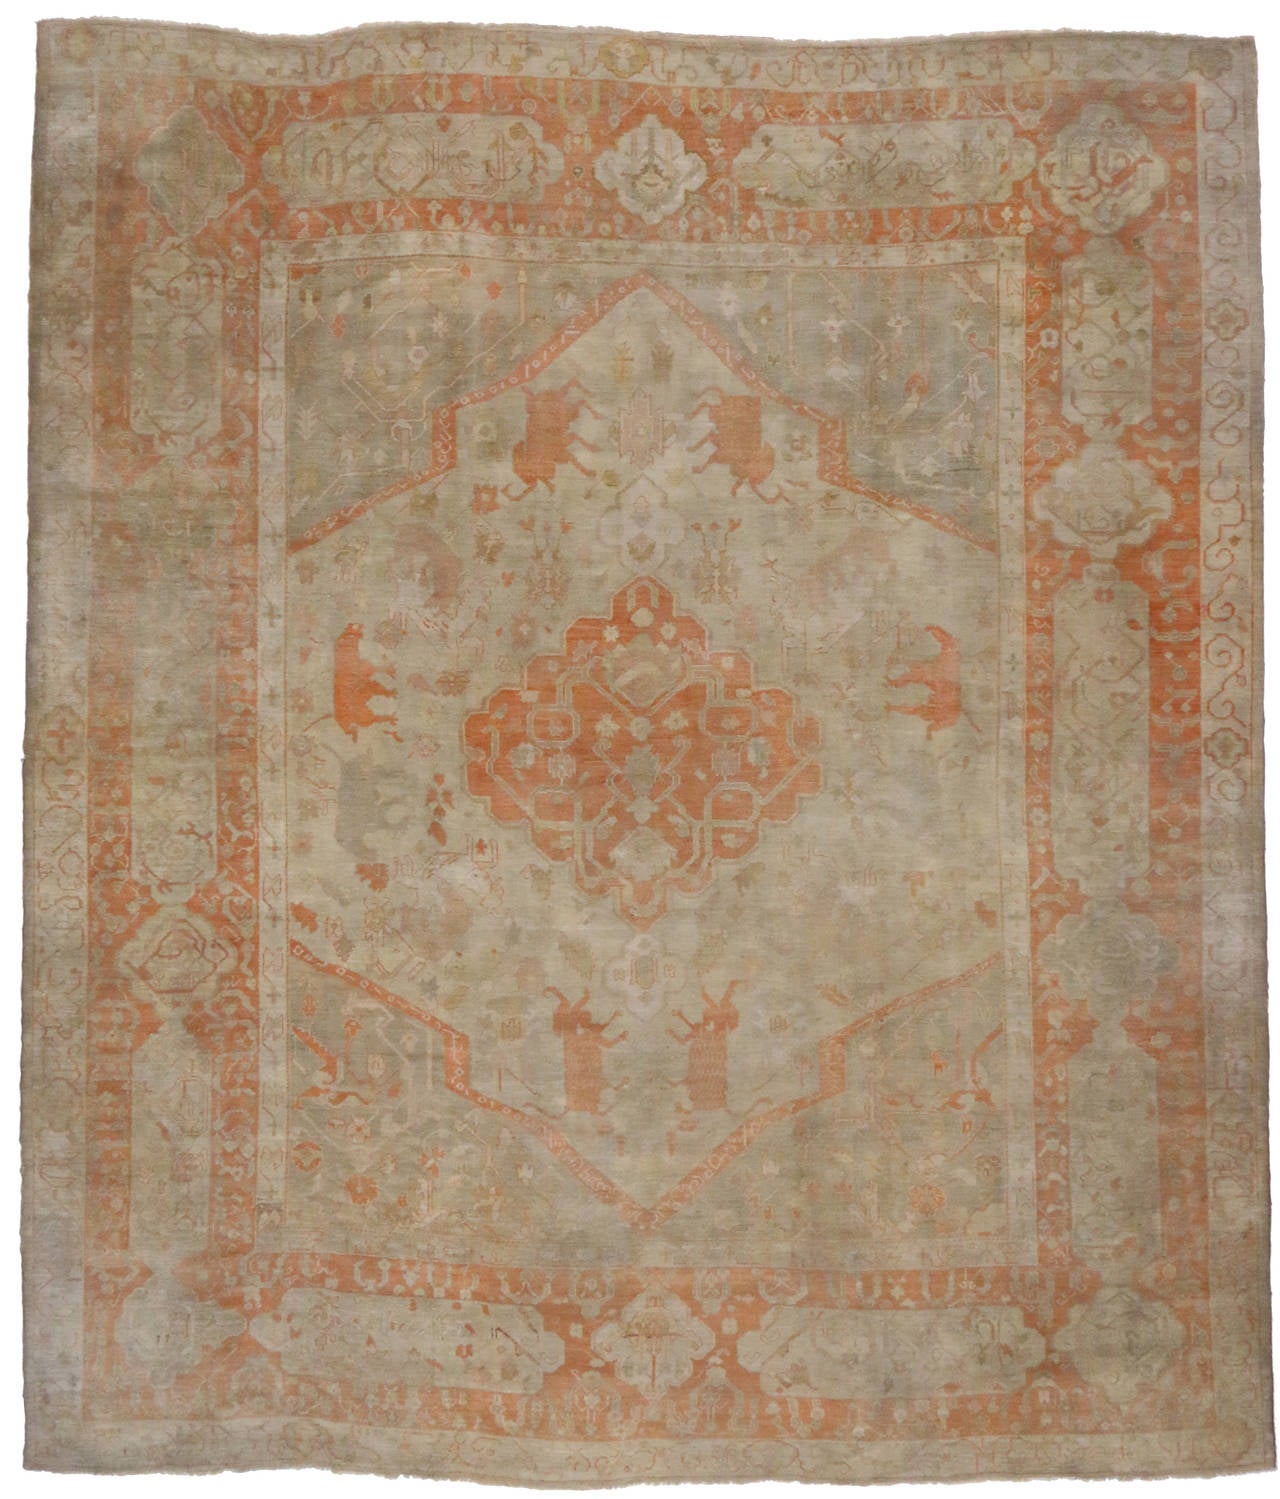 74255 Rare Antique Turkish Oushak Palace Size Rug with Elephant Motifs. Oushak stands for the western Anatolian Turkish city, known for its rare collectible rugs made during the Ottoman Empire. Hand woven from soft, silky wool and featuring warm,